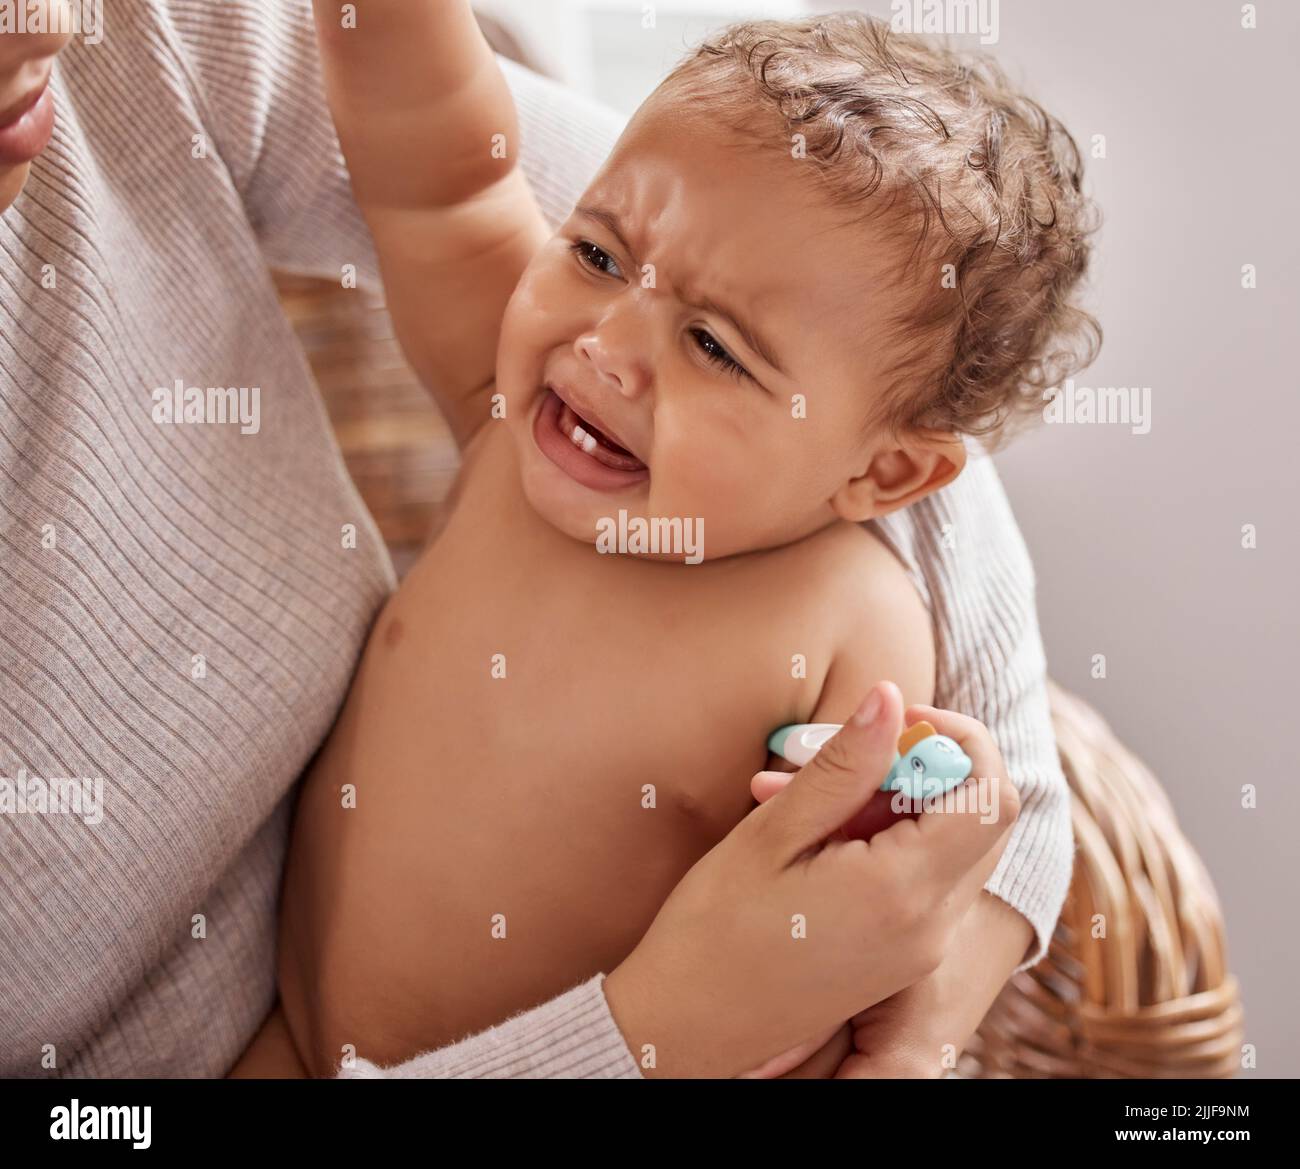 Moms always got you. a baby crying while having her temperature checked by her mother. Stock Photo